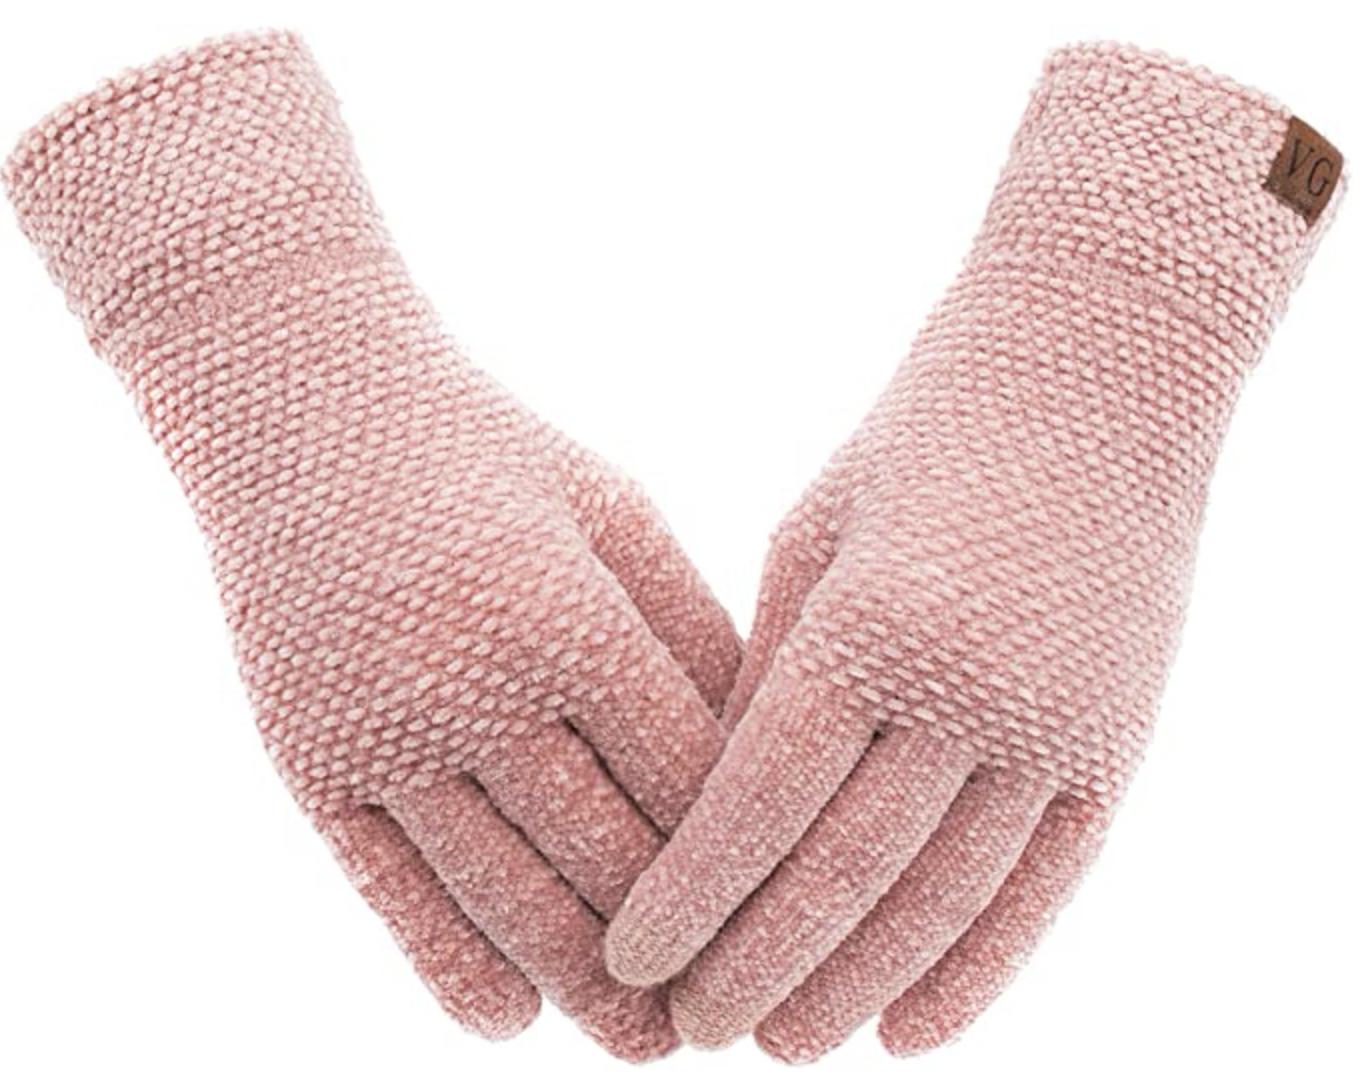 Winter Wool Mitten Gloves For Women Warm Knit Touchscreen Thermal Cable Gloves With Thick Fleece Lining